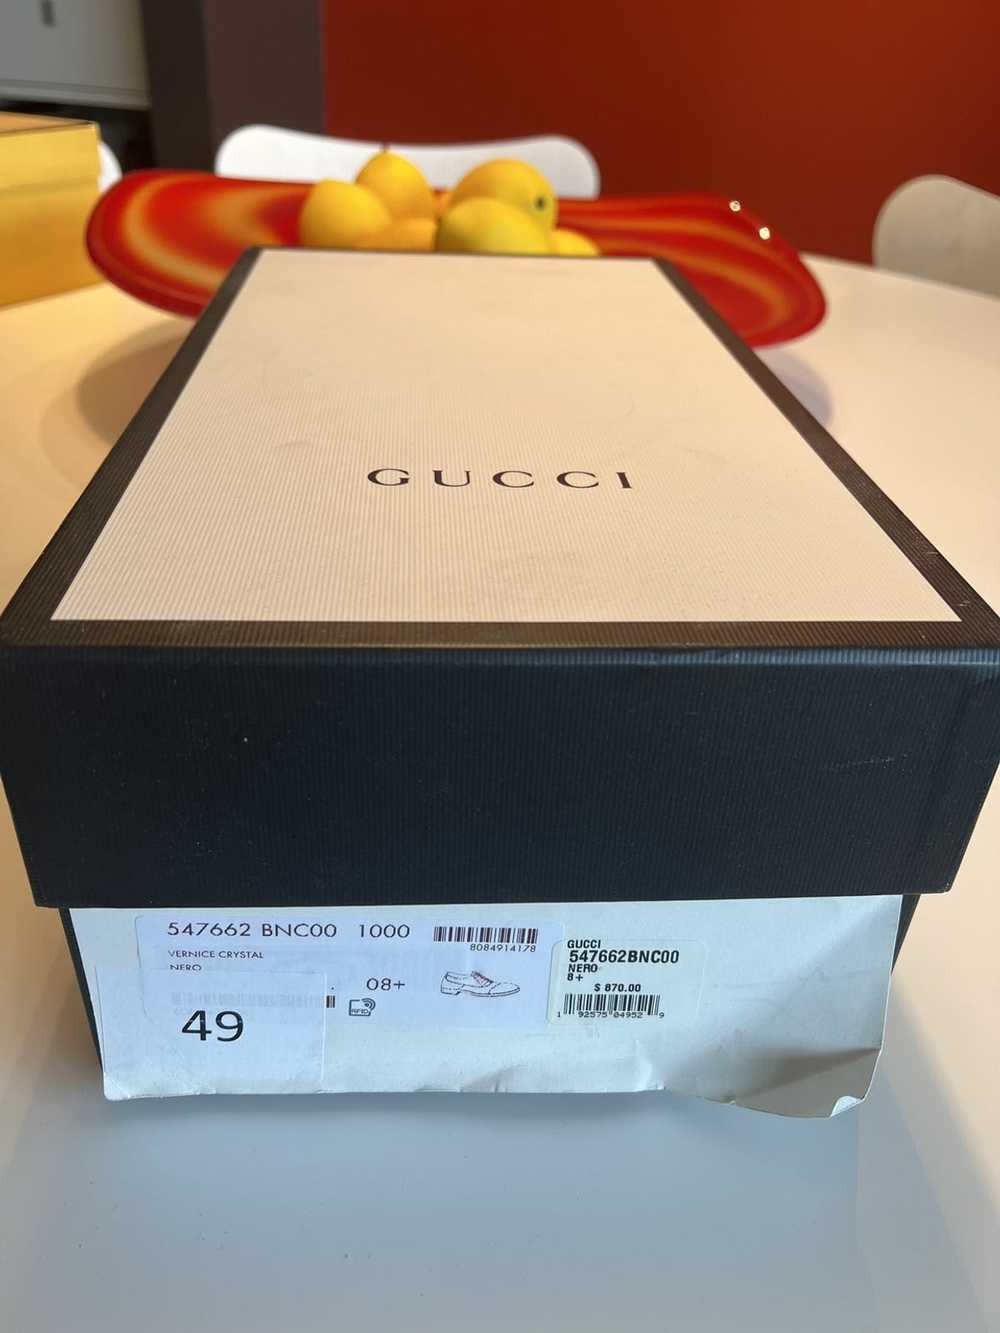 Gucci Gucci vernice Crystal black shoes - image 12